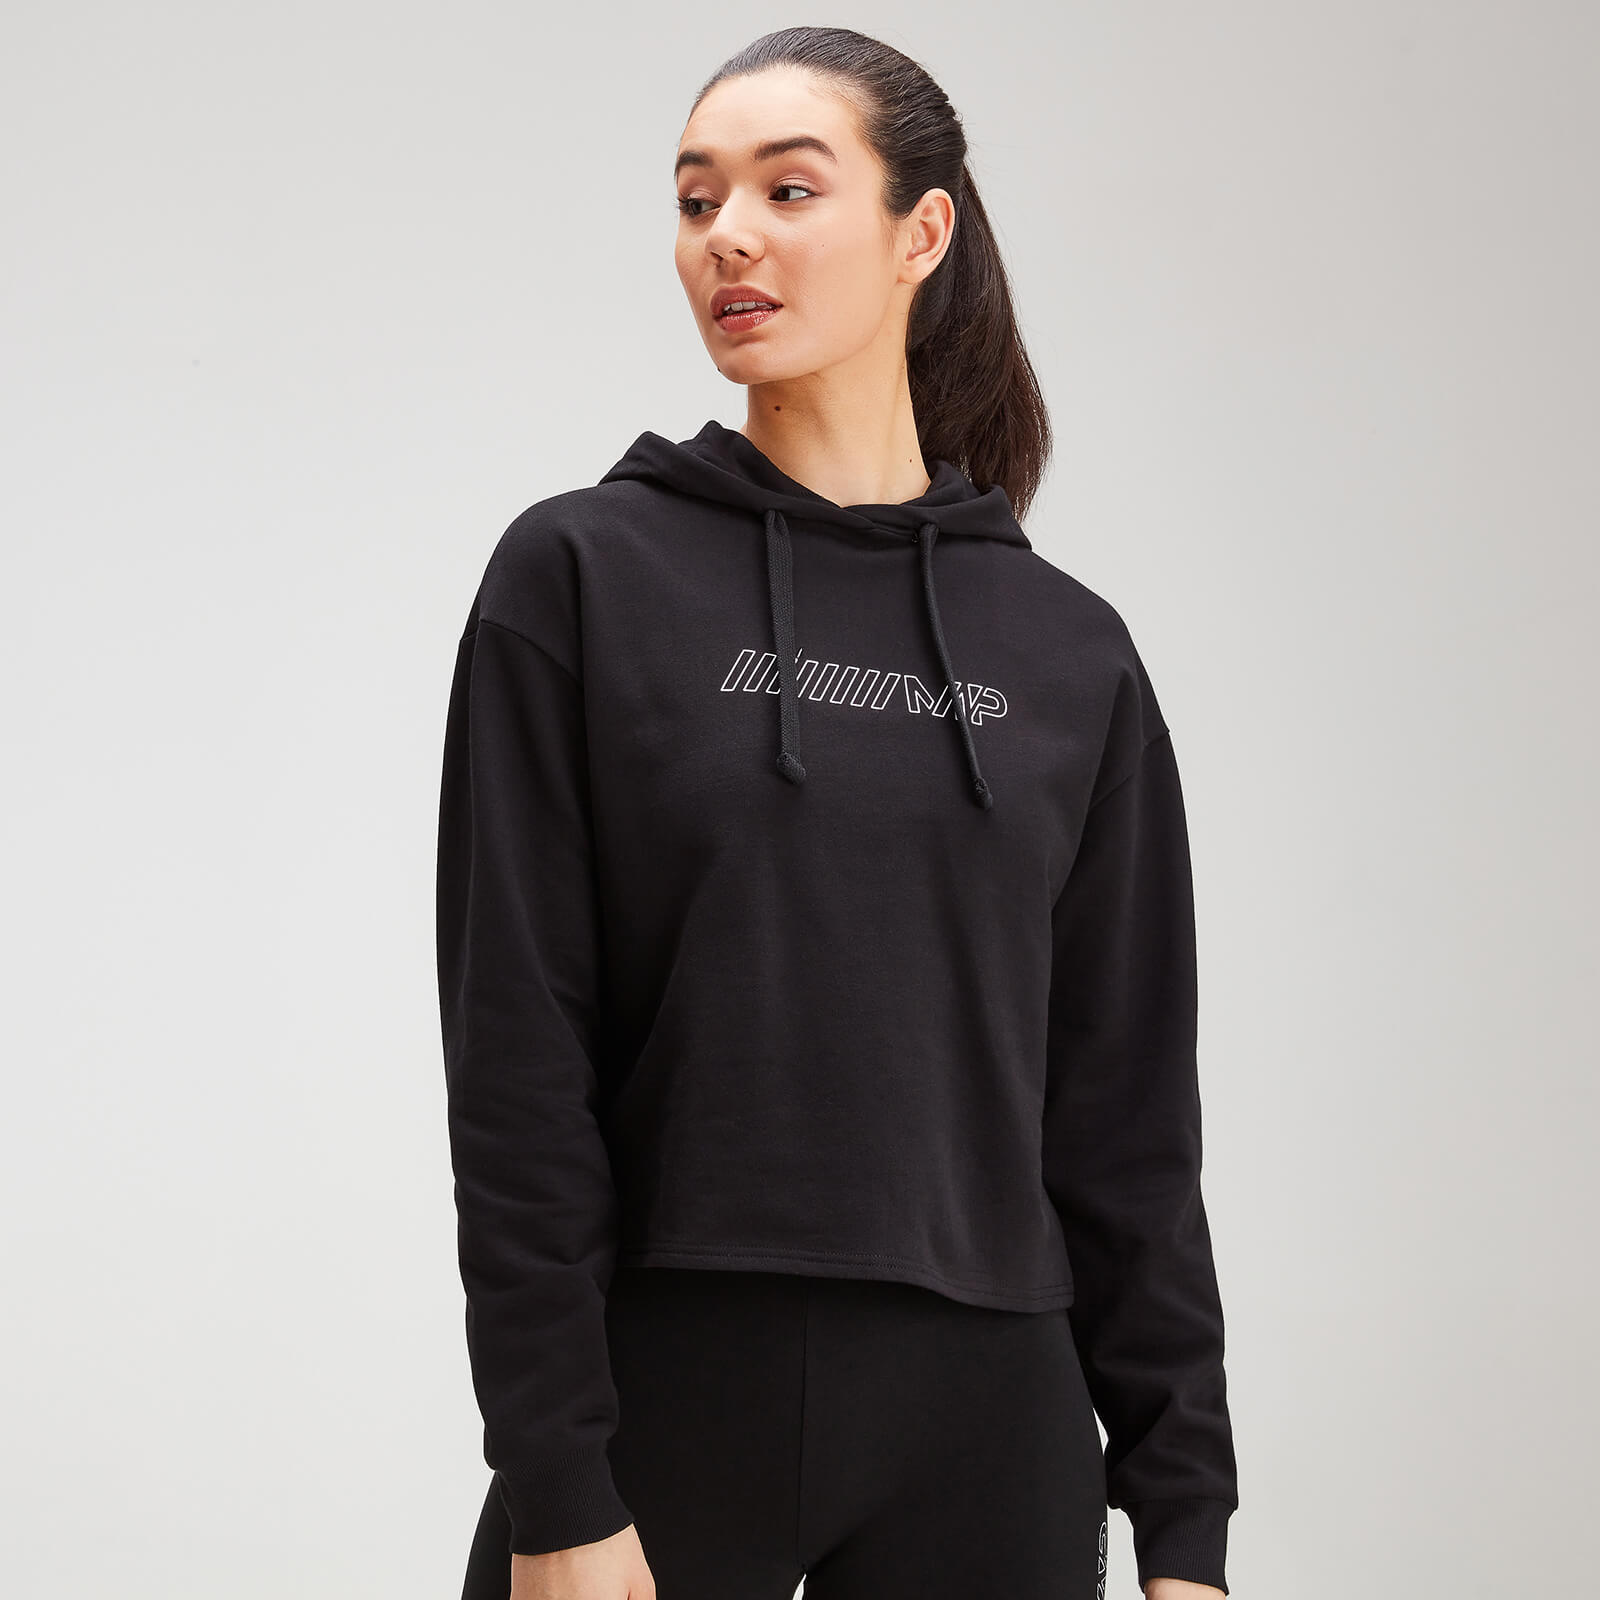 MP Women's Outline Graphic Hoodie - Black - XS